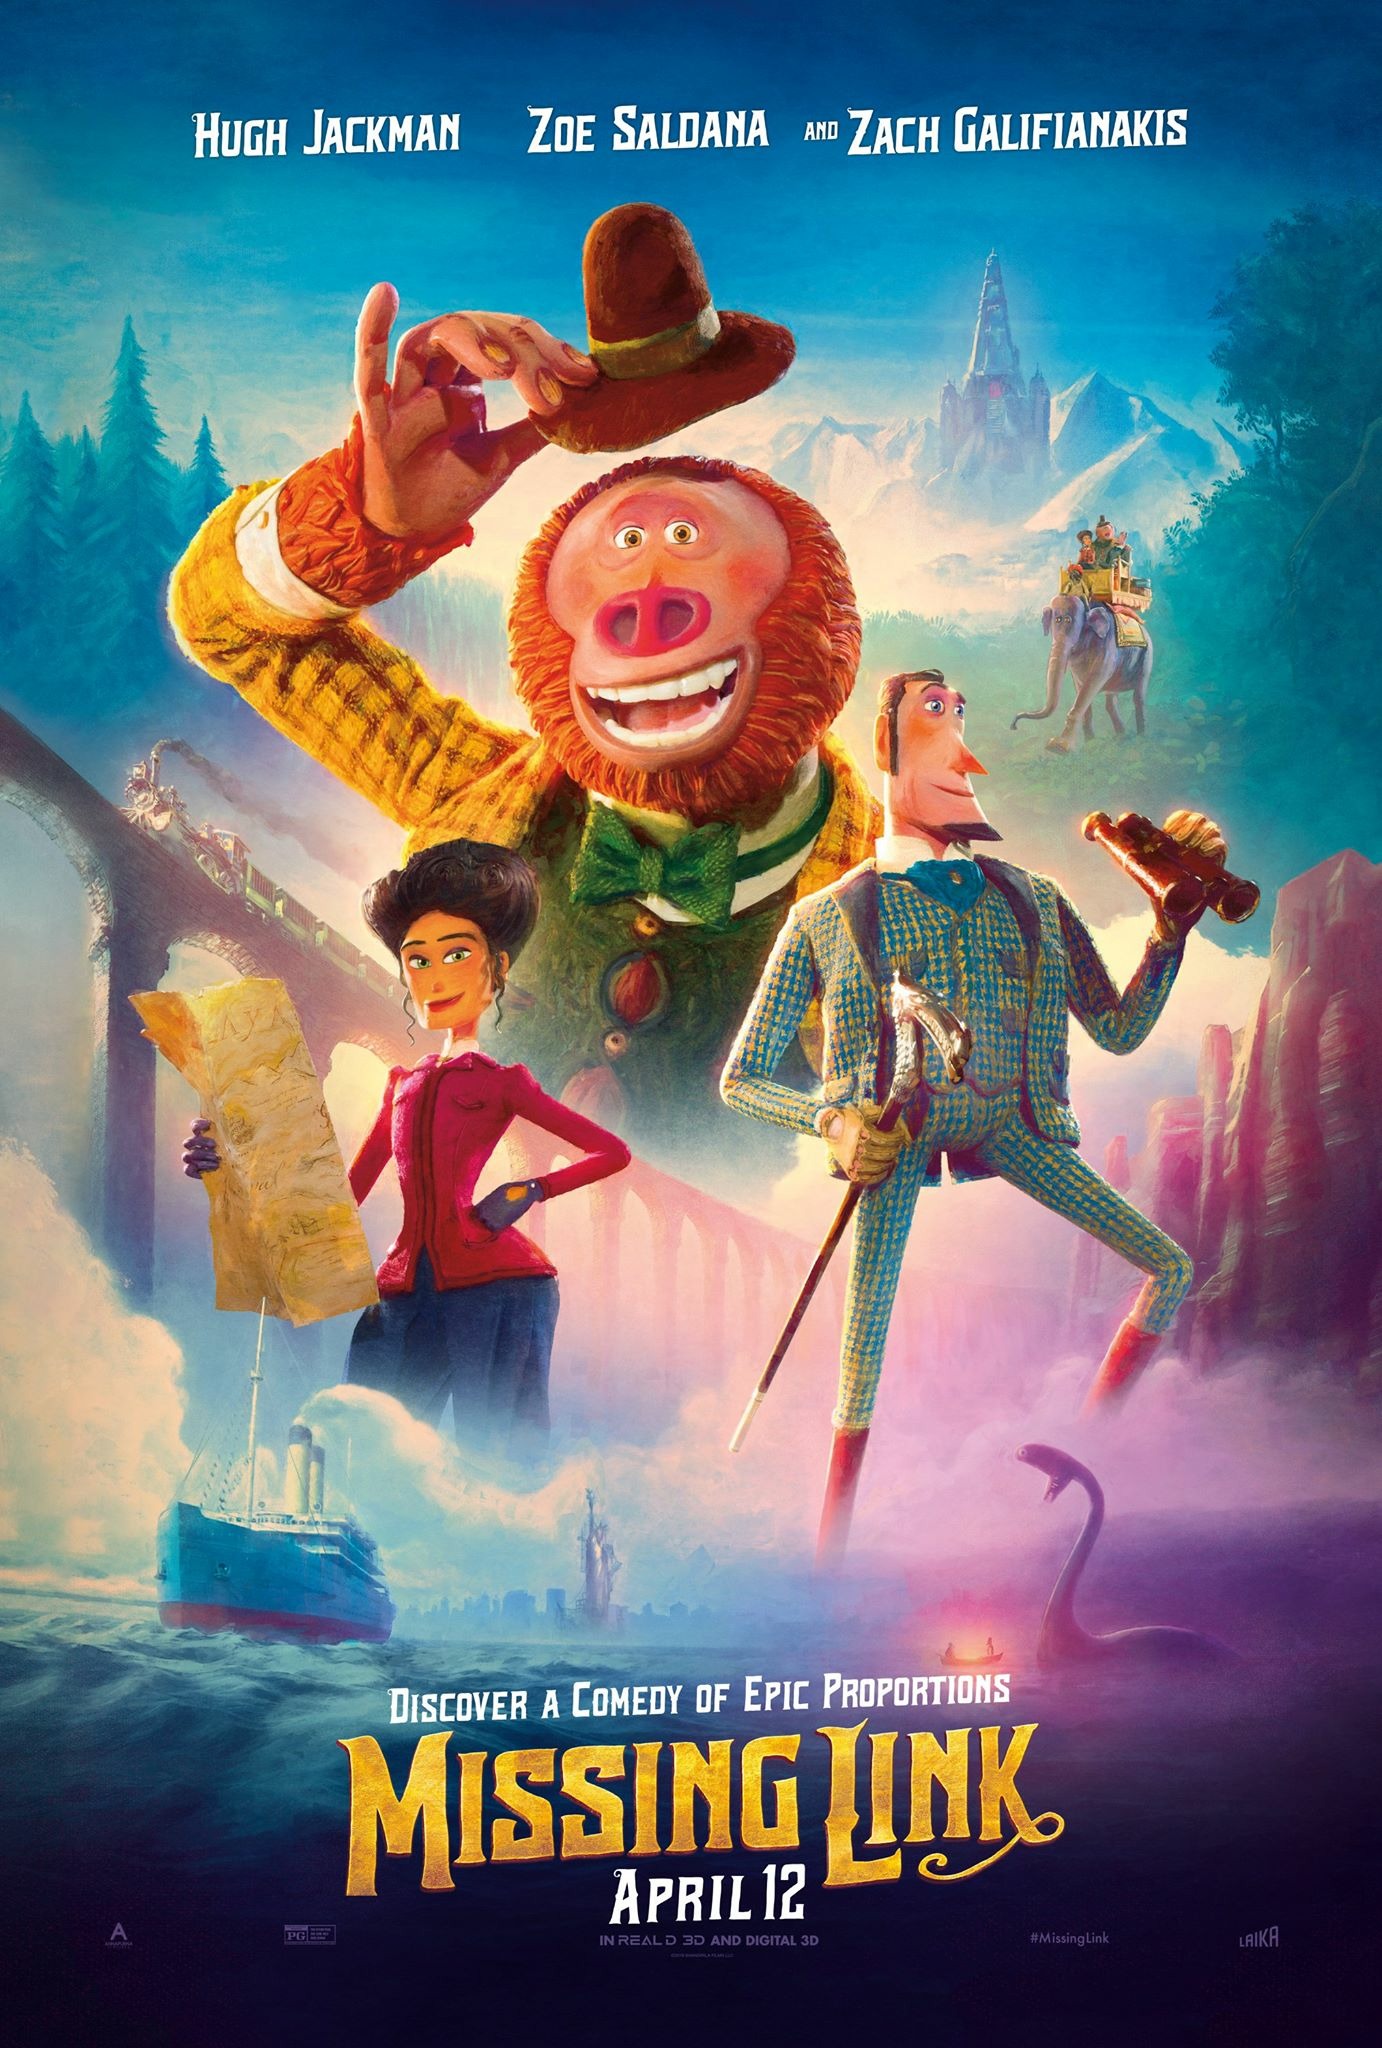 Missing Link film review: a must sasqu-watch family adventure